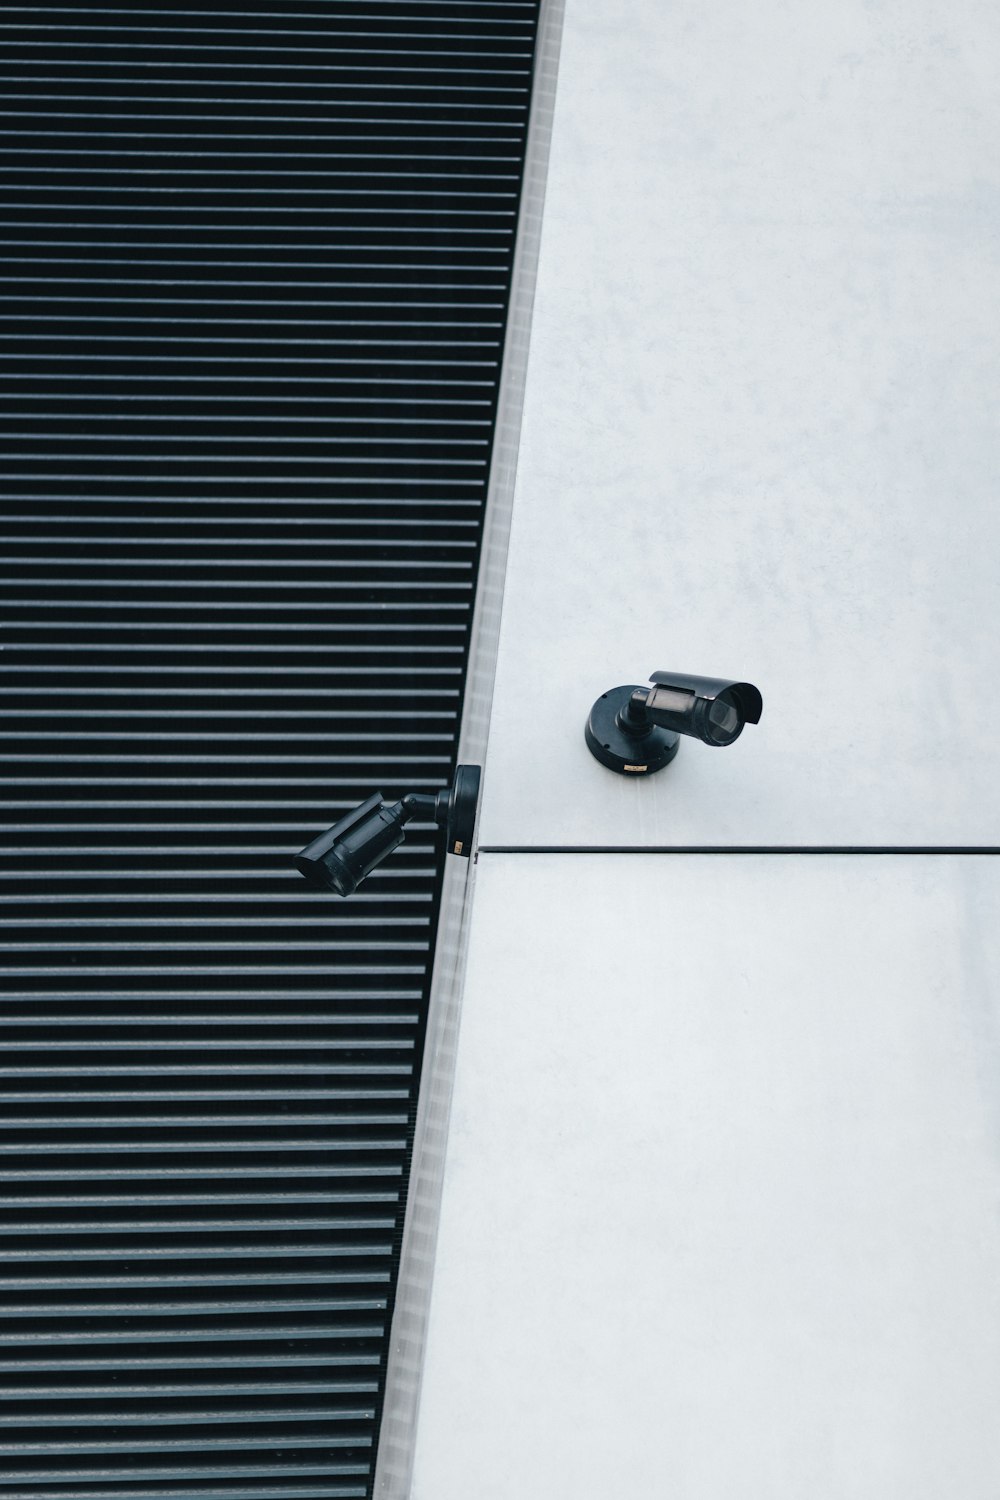 a pair of black shoes sitting on the side of a building